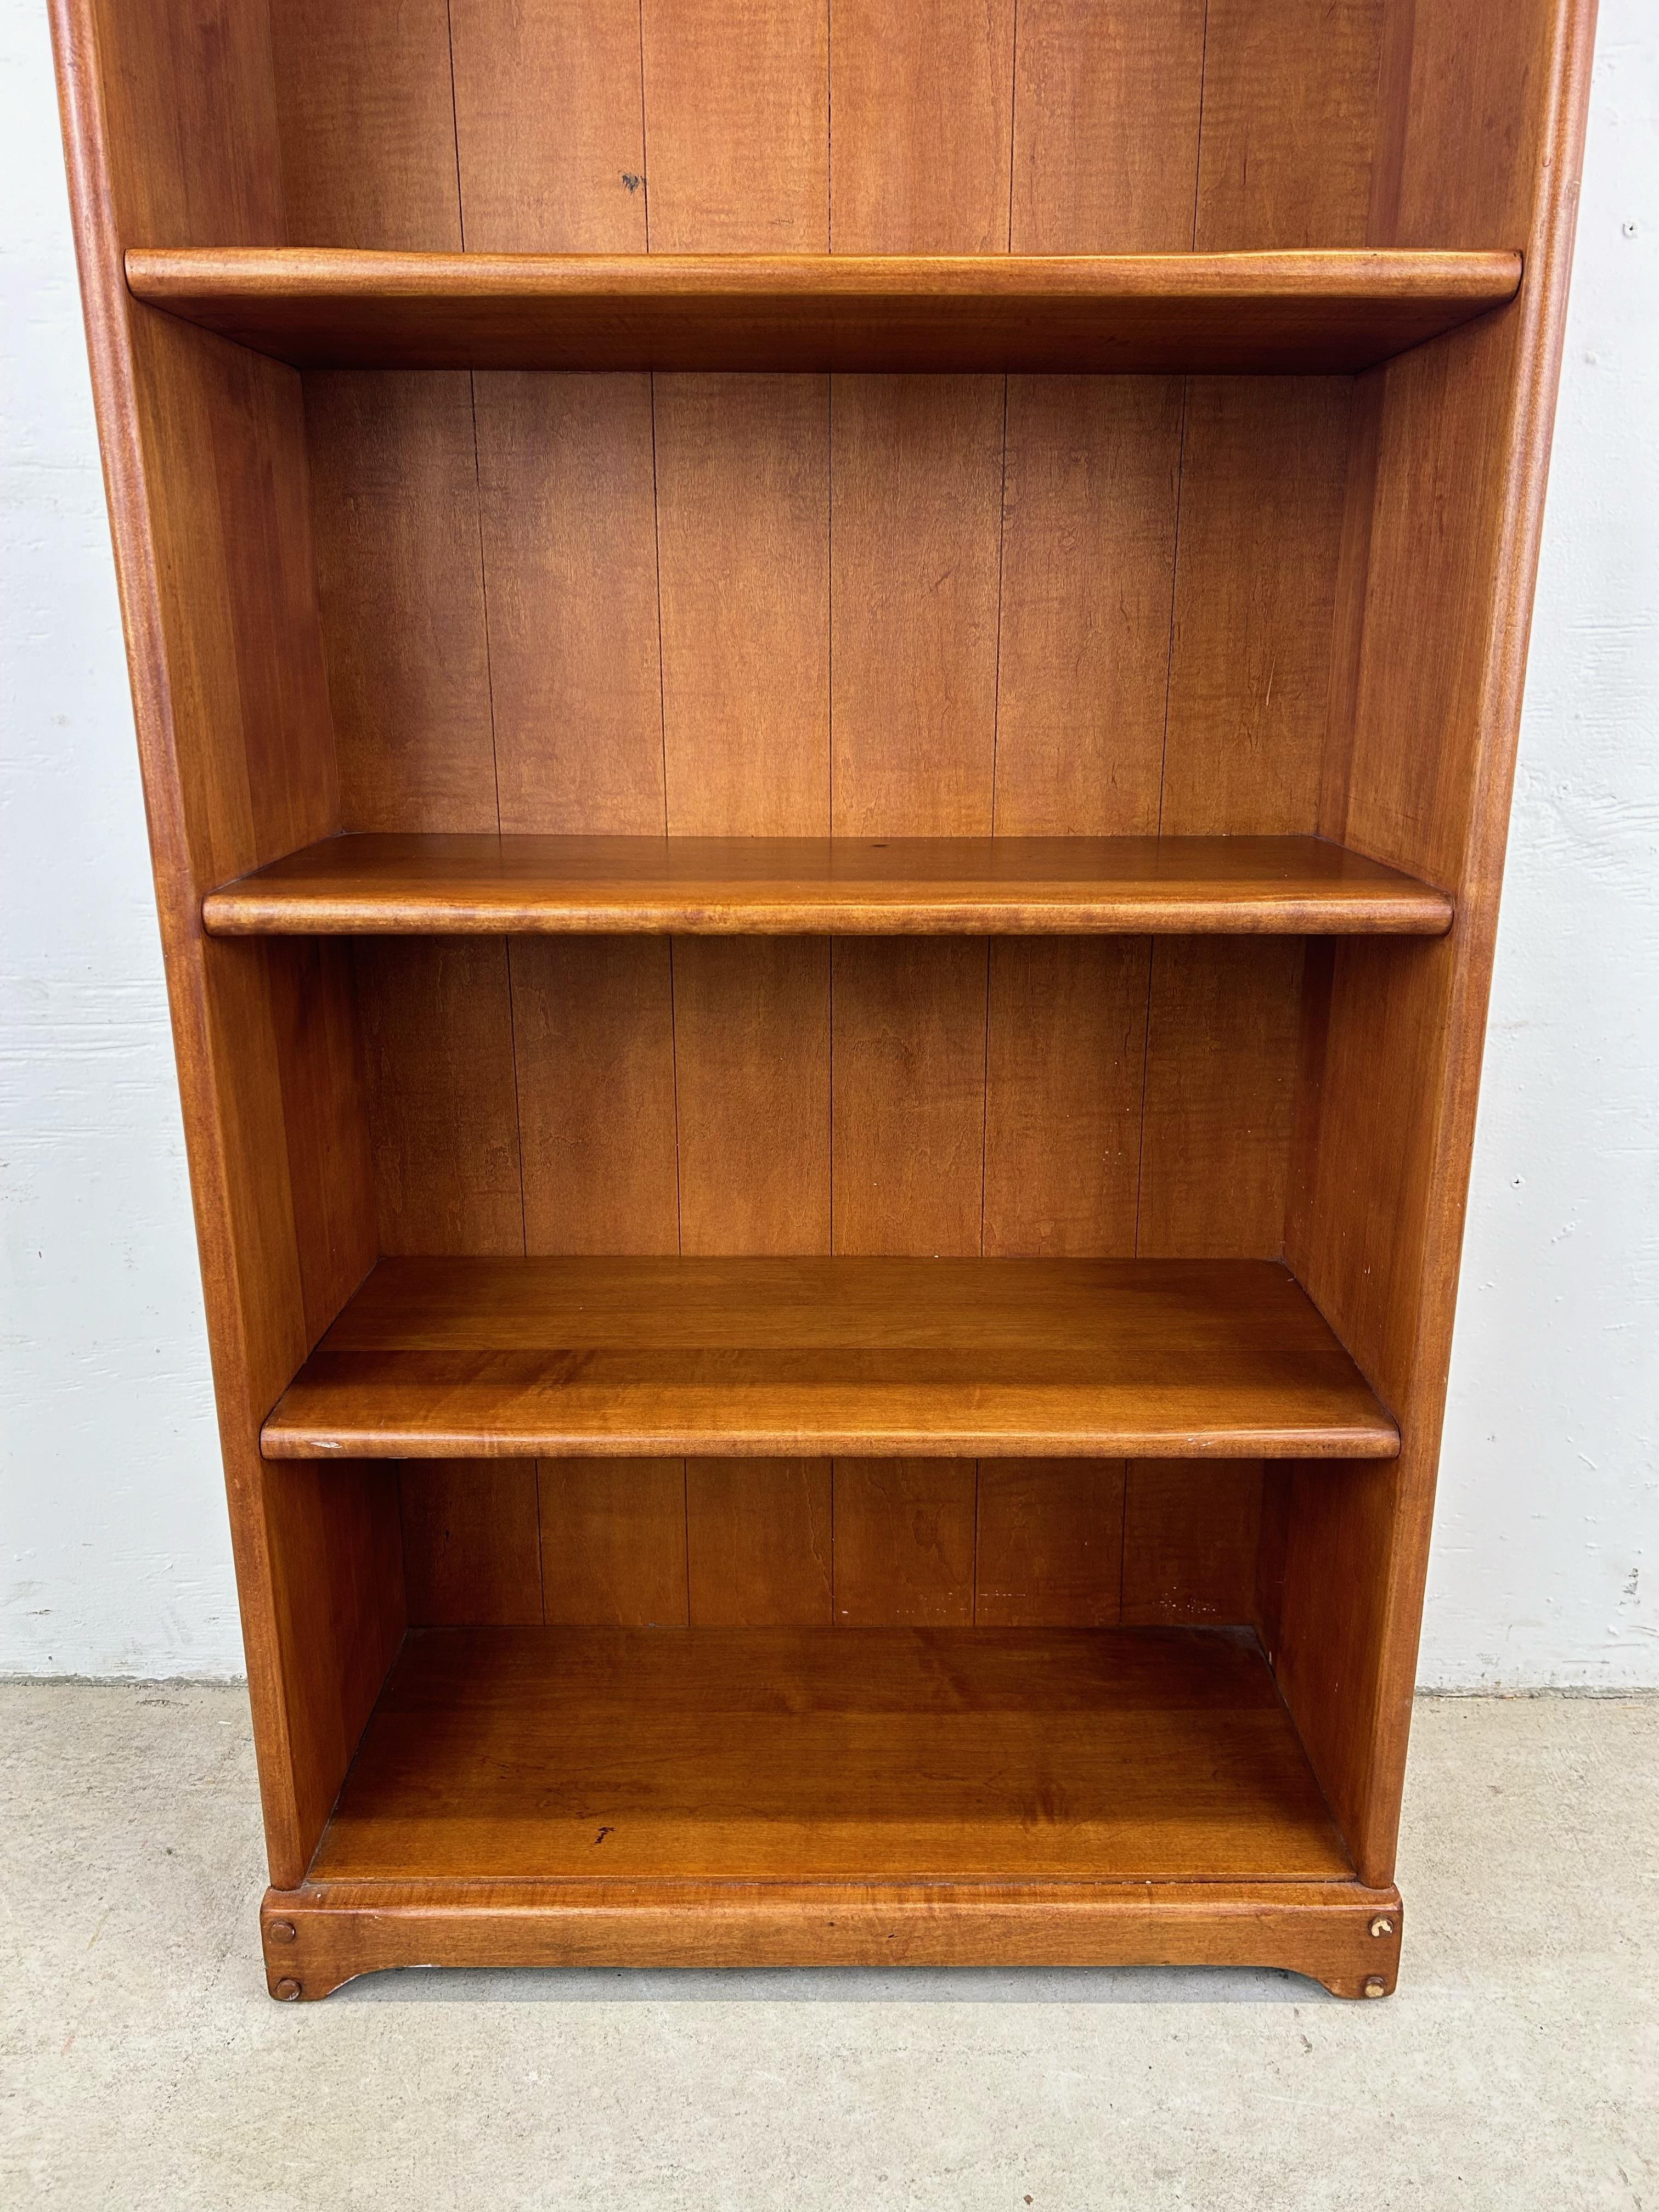 Vintage Farmhouse Style Bookcase with 4 Shelves In Good Condition For Sale In Freehold, NJ